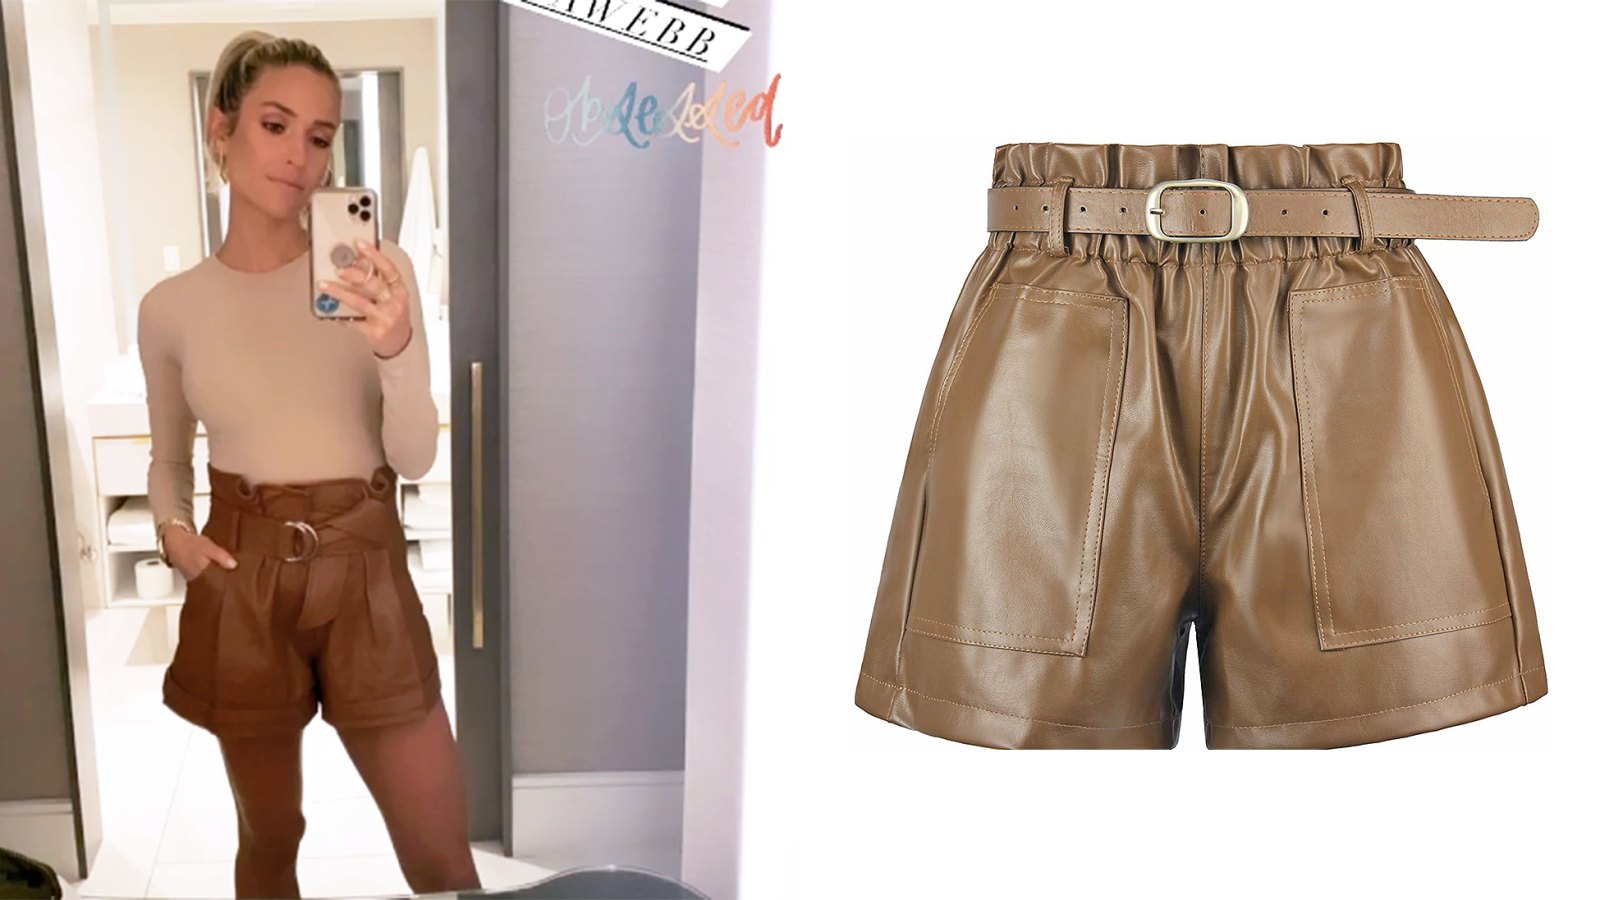 How to Style Leather Shorts